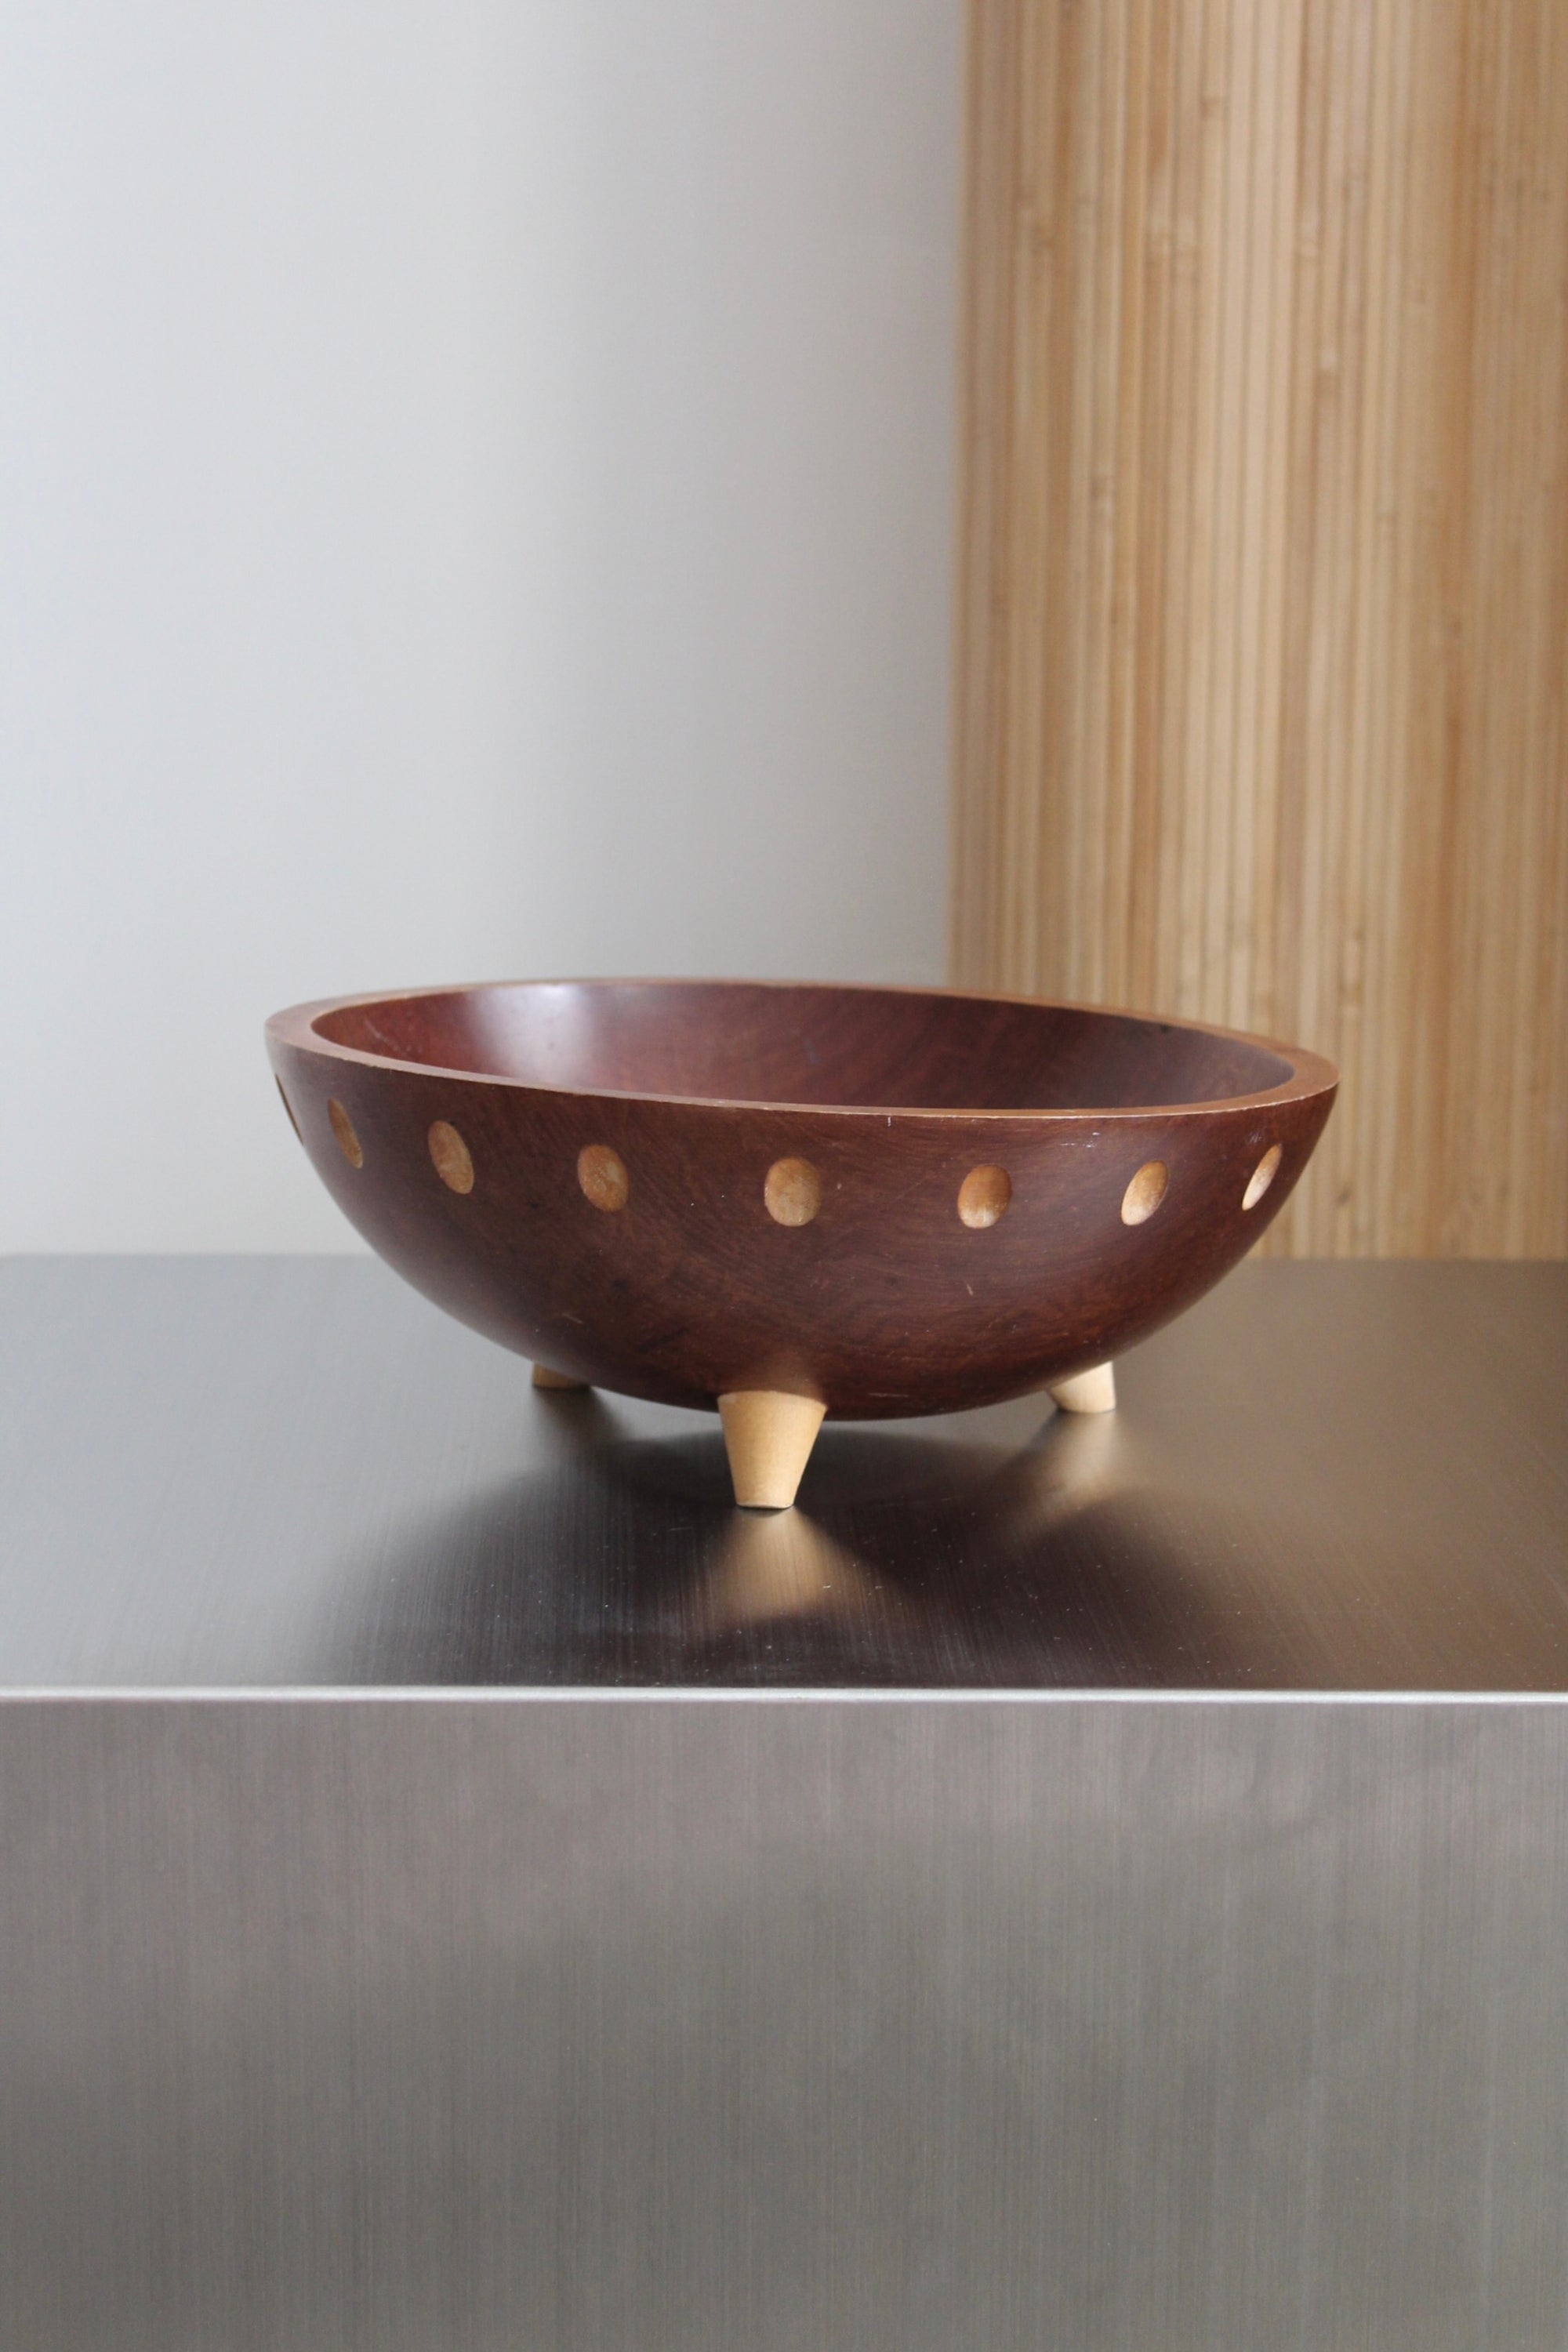 Maple Serving Bowl by Baribocraft